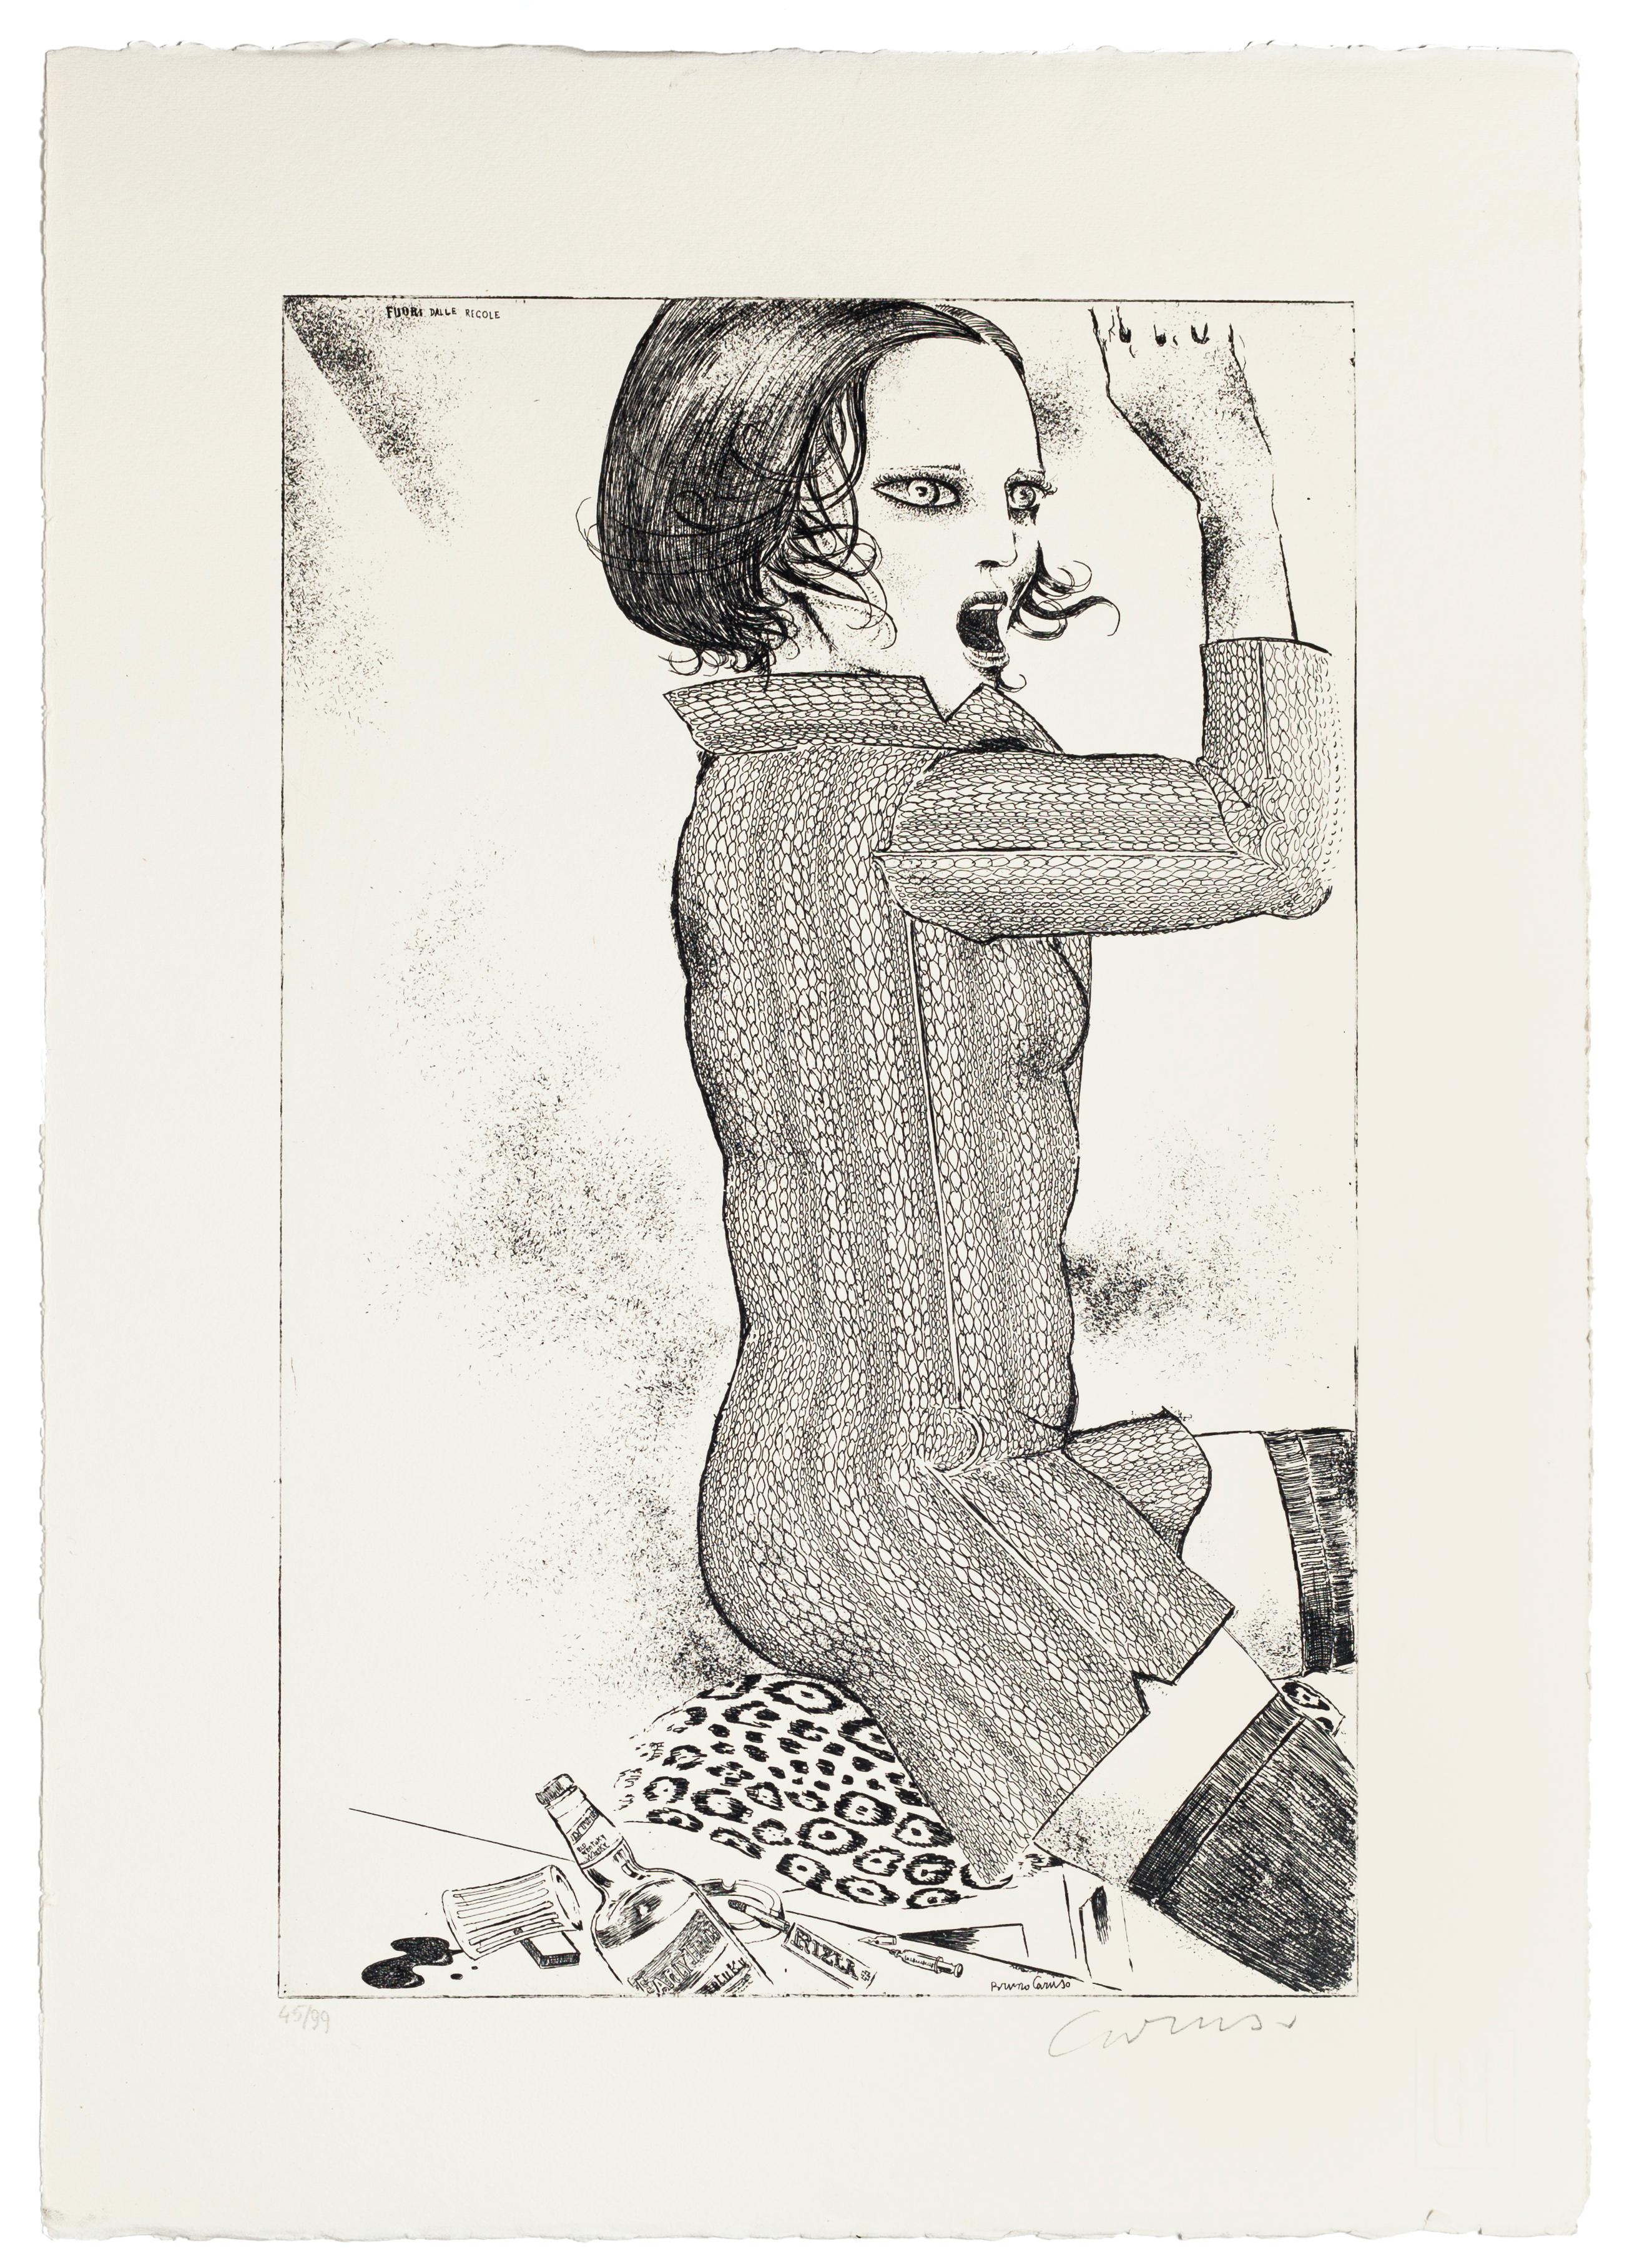 Out of Rules is an original black and white etching on paper, realized by the Italian artist Bruno Caruso.

Signed, titled, numbered, edition of 45/99.

In excellent conditions.

The artwork representing a drunk woman with a bottle of empty whiskey